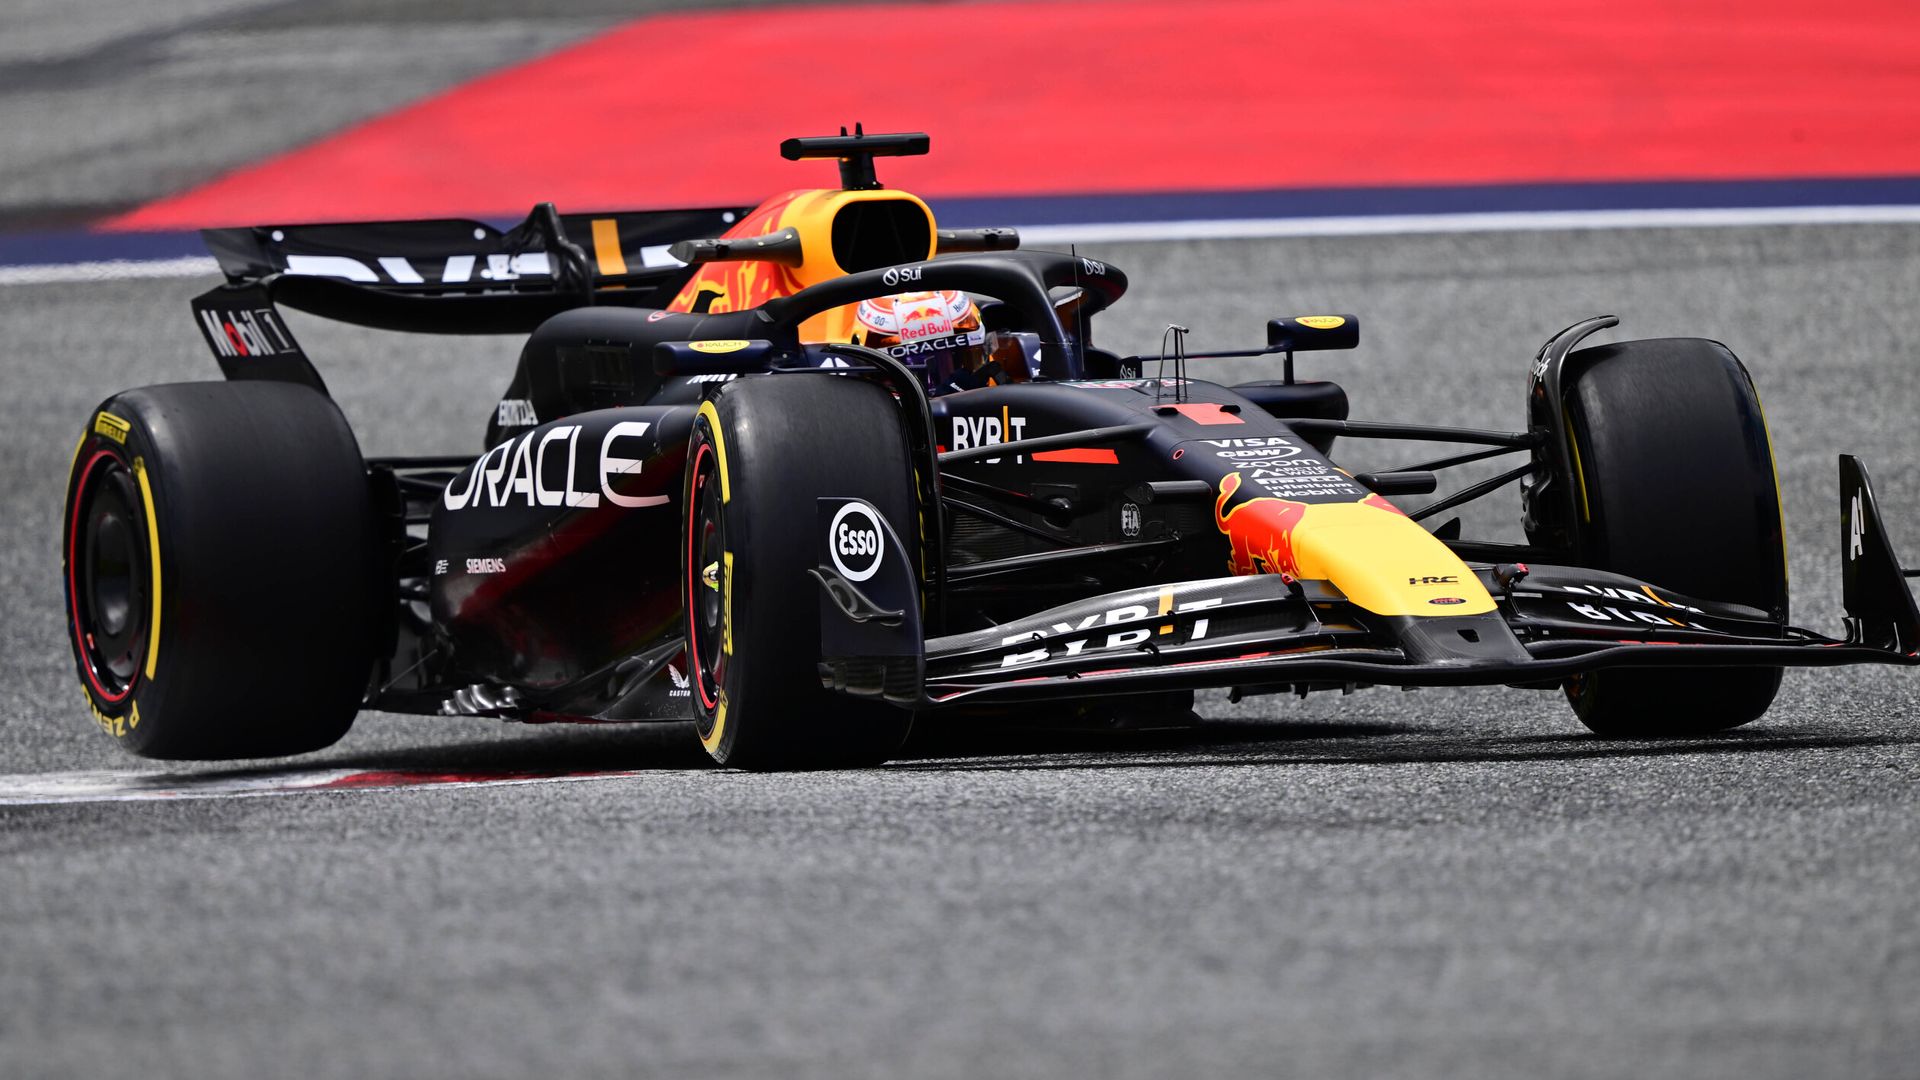 Austrian GP: Verstappen quickest after stopping on track LIVE!